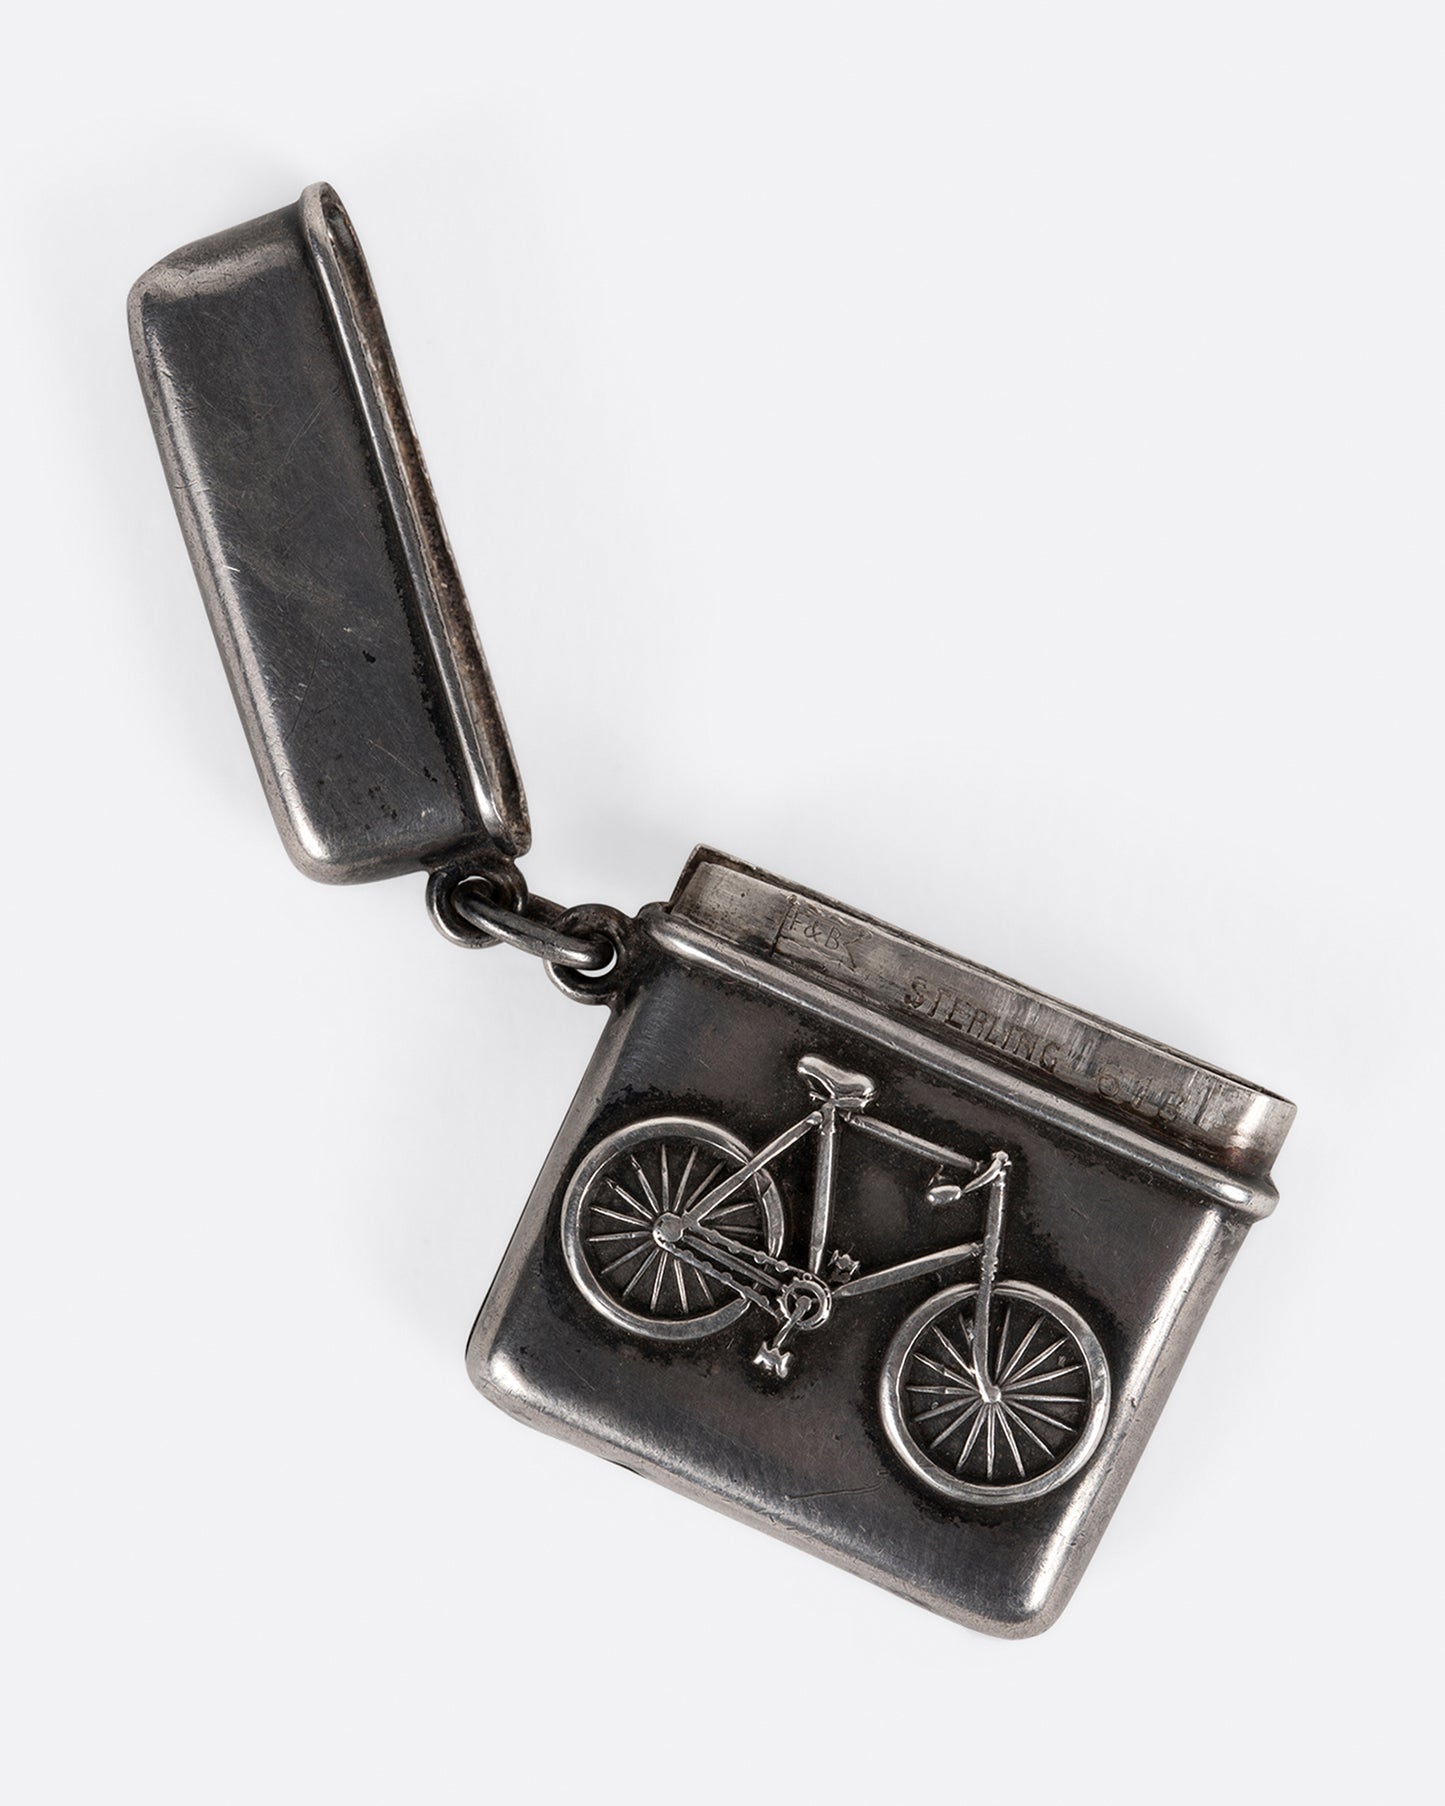 Sterling Silver Bicycle Box